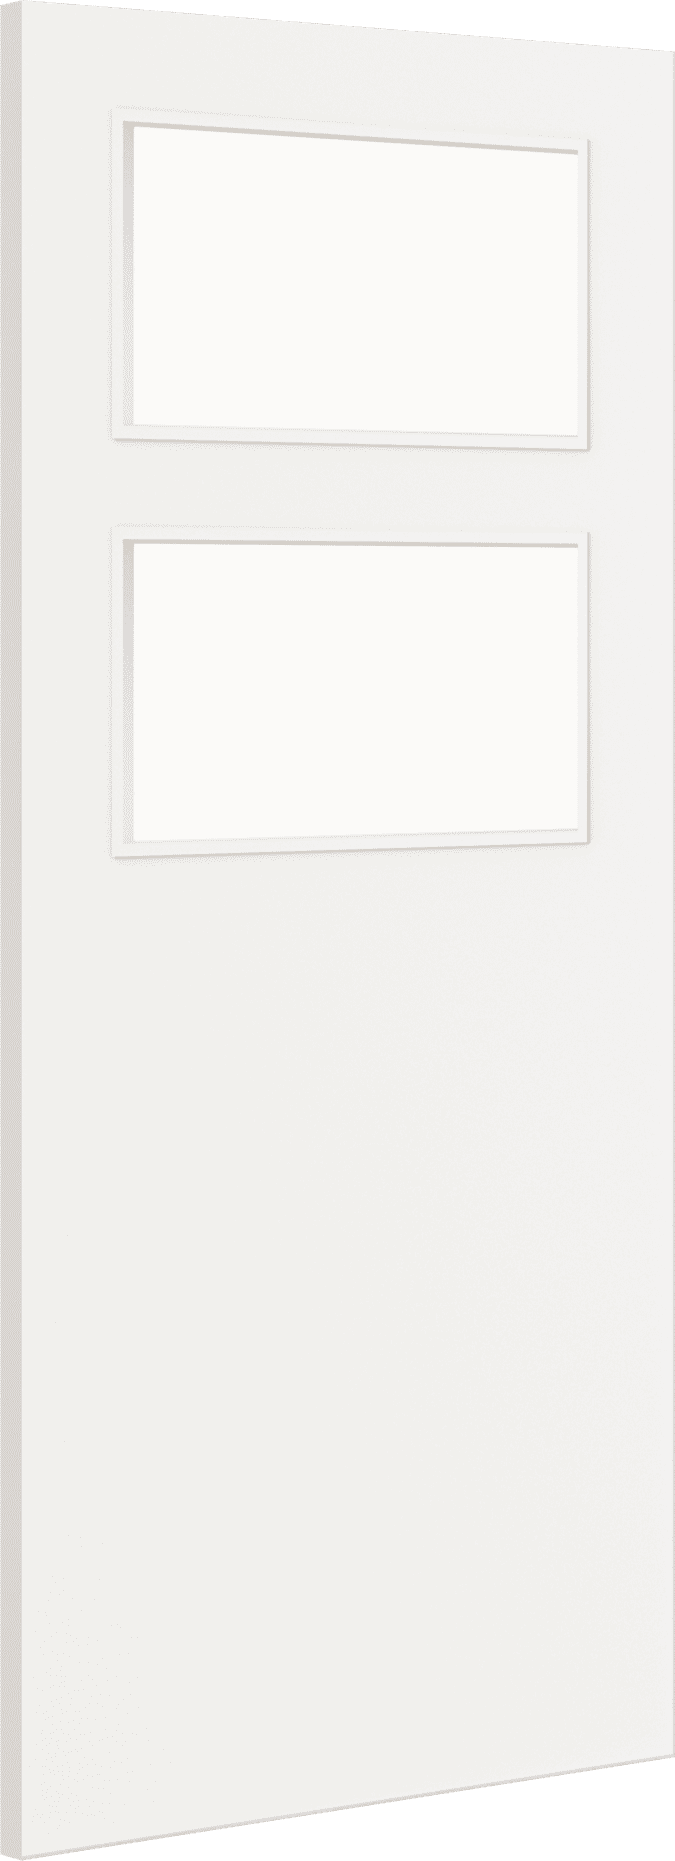 1981mm x 762mm x 44mm (30") Architectural Paint Grade White 02 Frosted Glazed Fire Door Blank